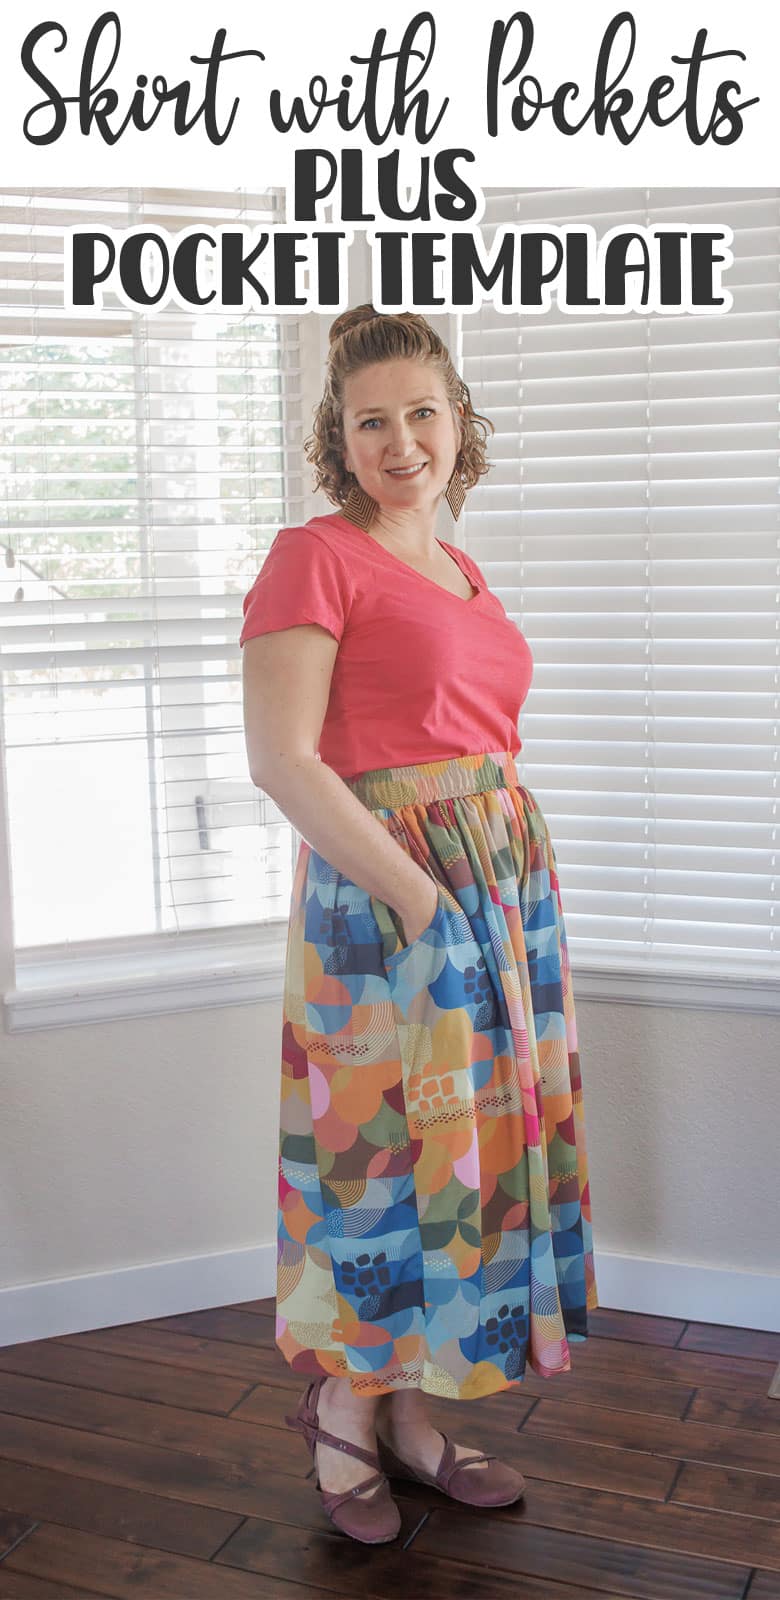 This tutorial will show you how to sew a skirt and add cute large pockets. A free pocket template included as well as step by step instructions for sewing this gorgeous skirt with large pockets.